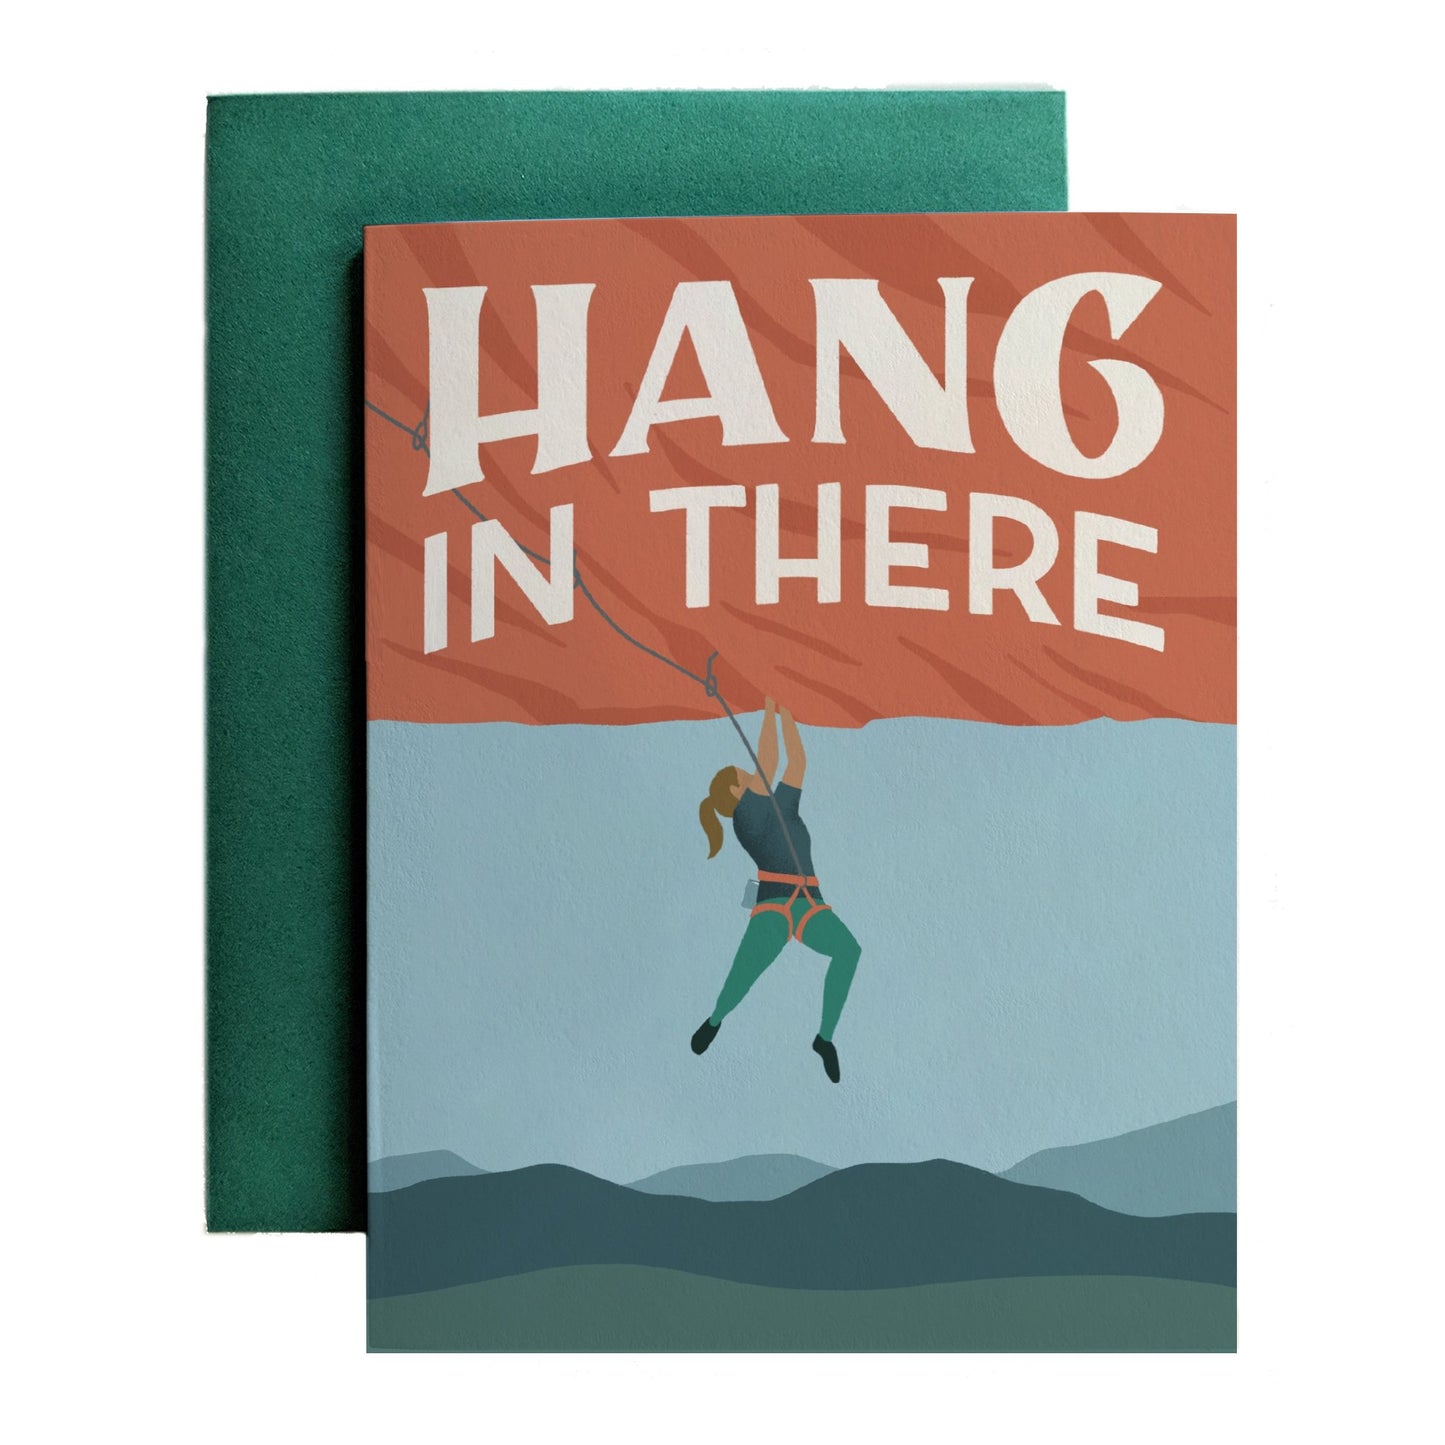 Hang in There - Amber Share Design---